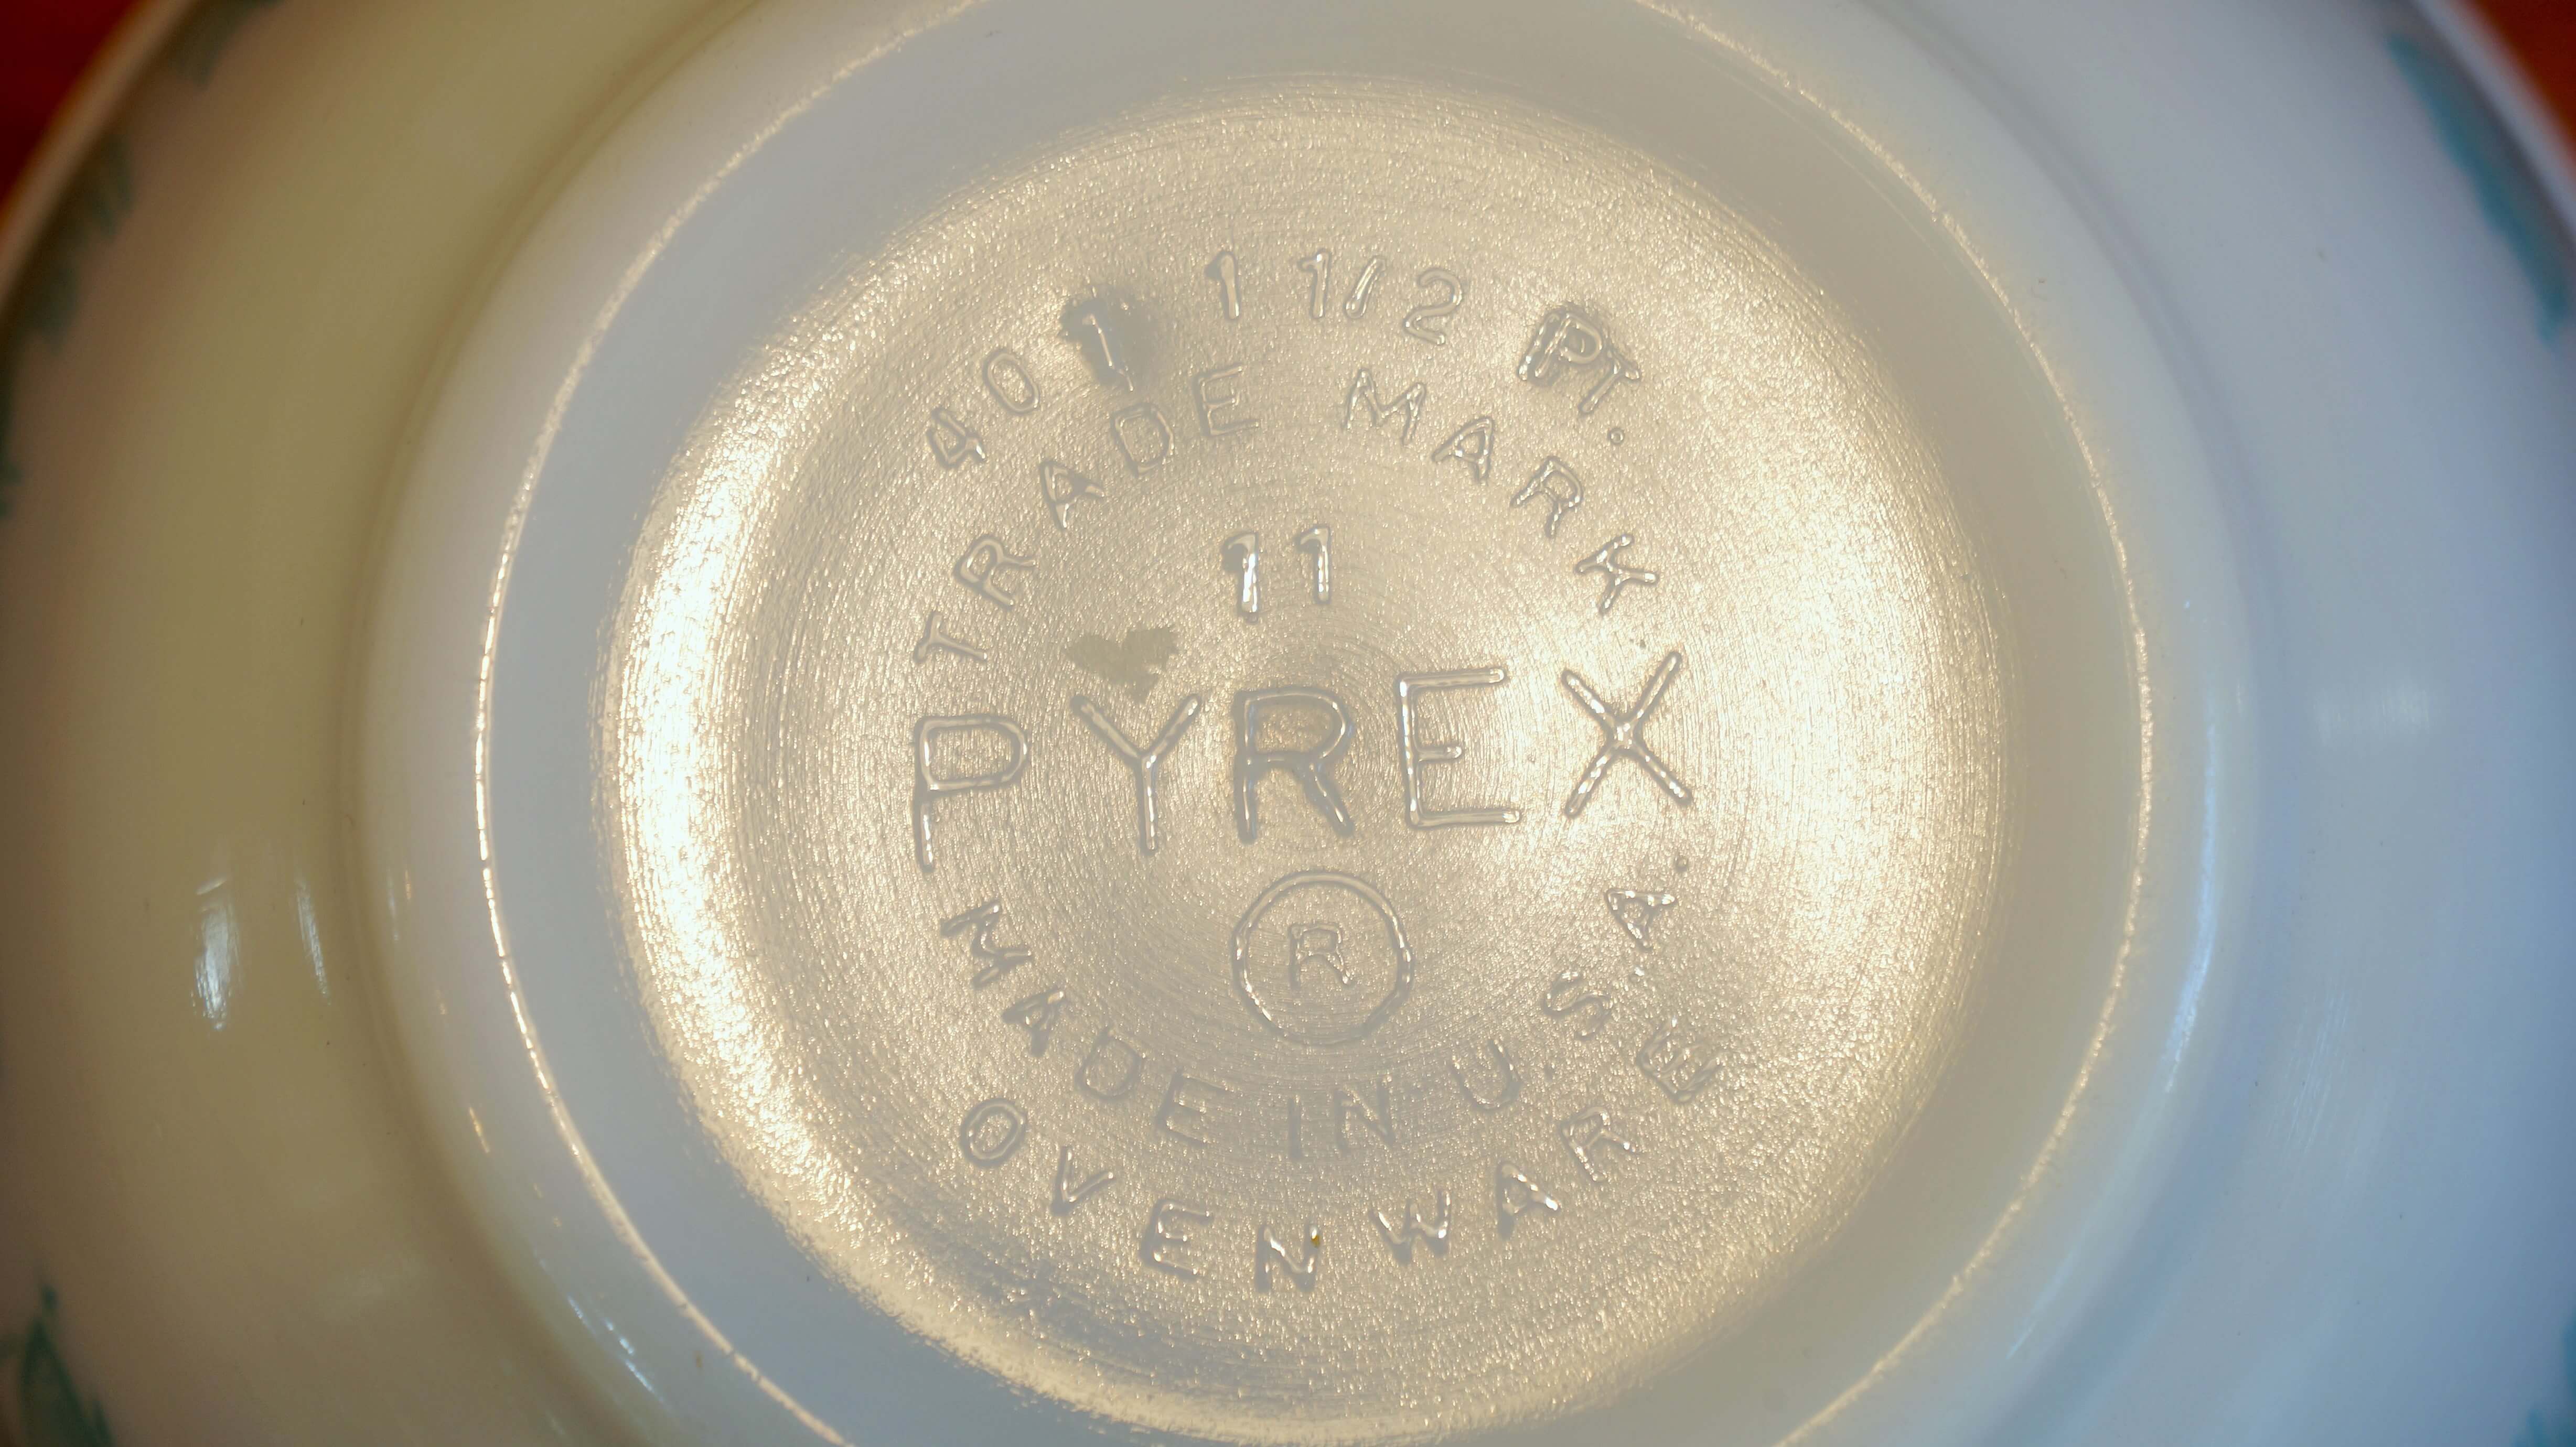 OLD PYREX Mixing Bowl "Butter Print" Ssize made in USA/オールドパイレックス ミキシングボウル "バタープリント" Sサイズ アメリカ製